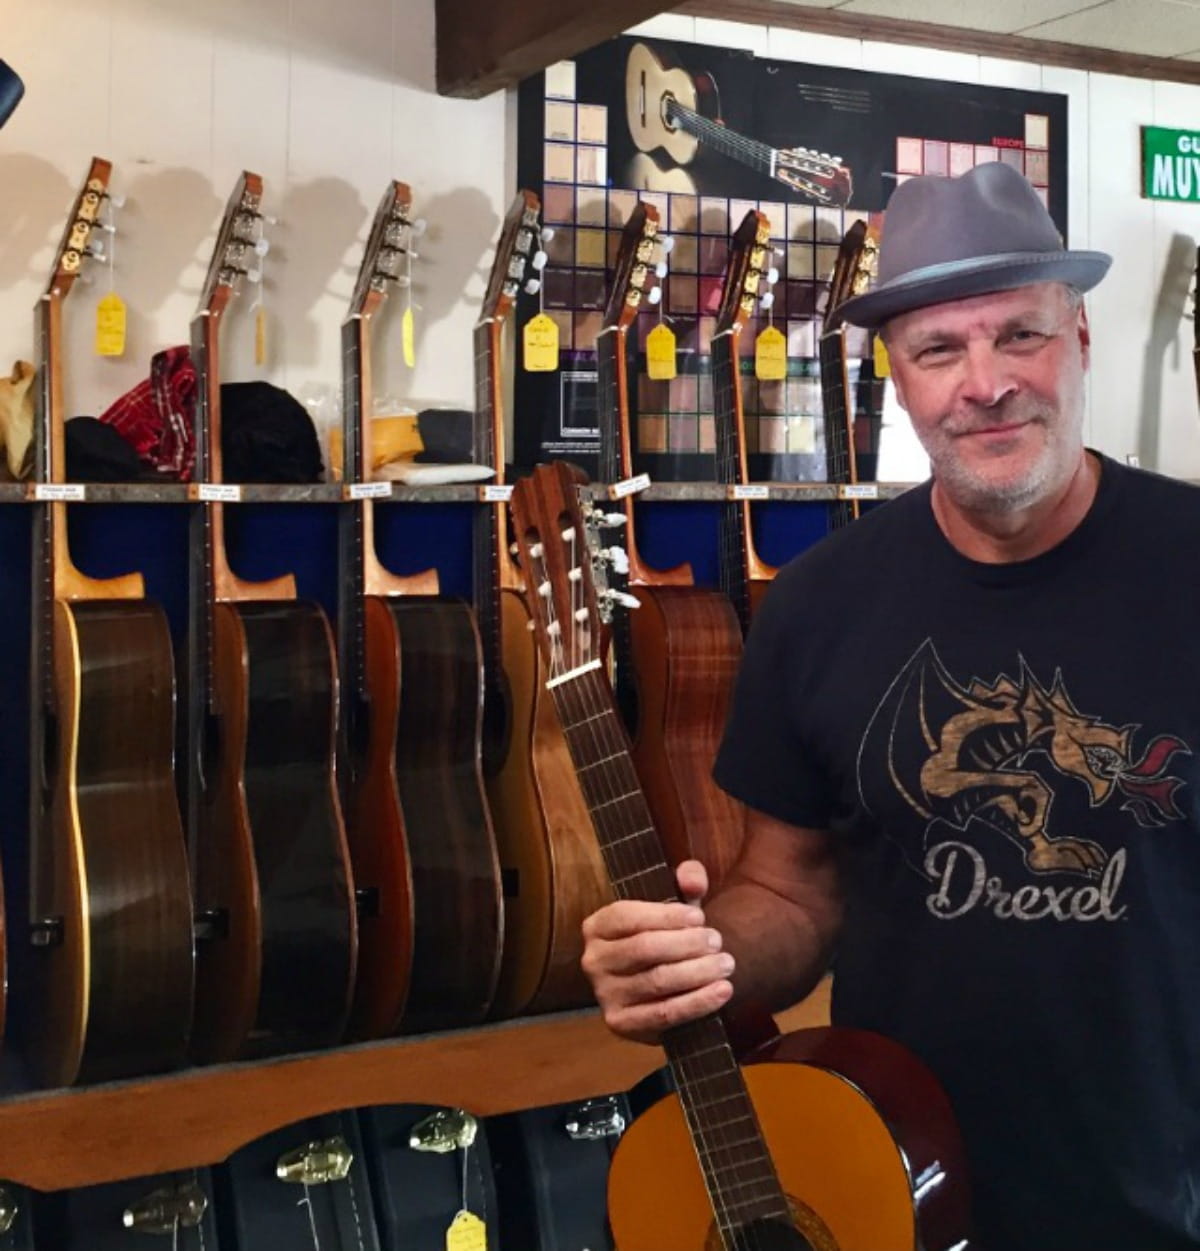 Besides Drexel University,  Eric likes to "hang out" at the Philadelphia Classical Guitar Store at 2038 Sansom St.